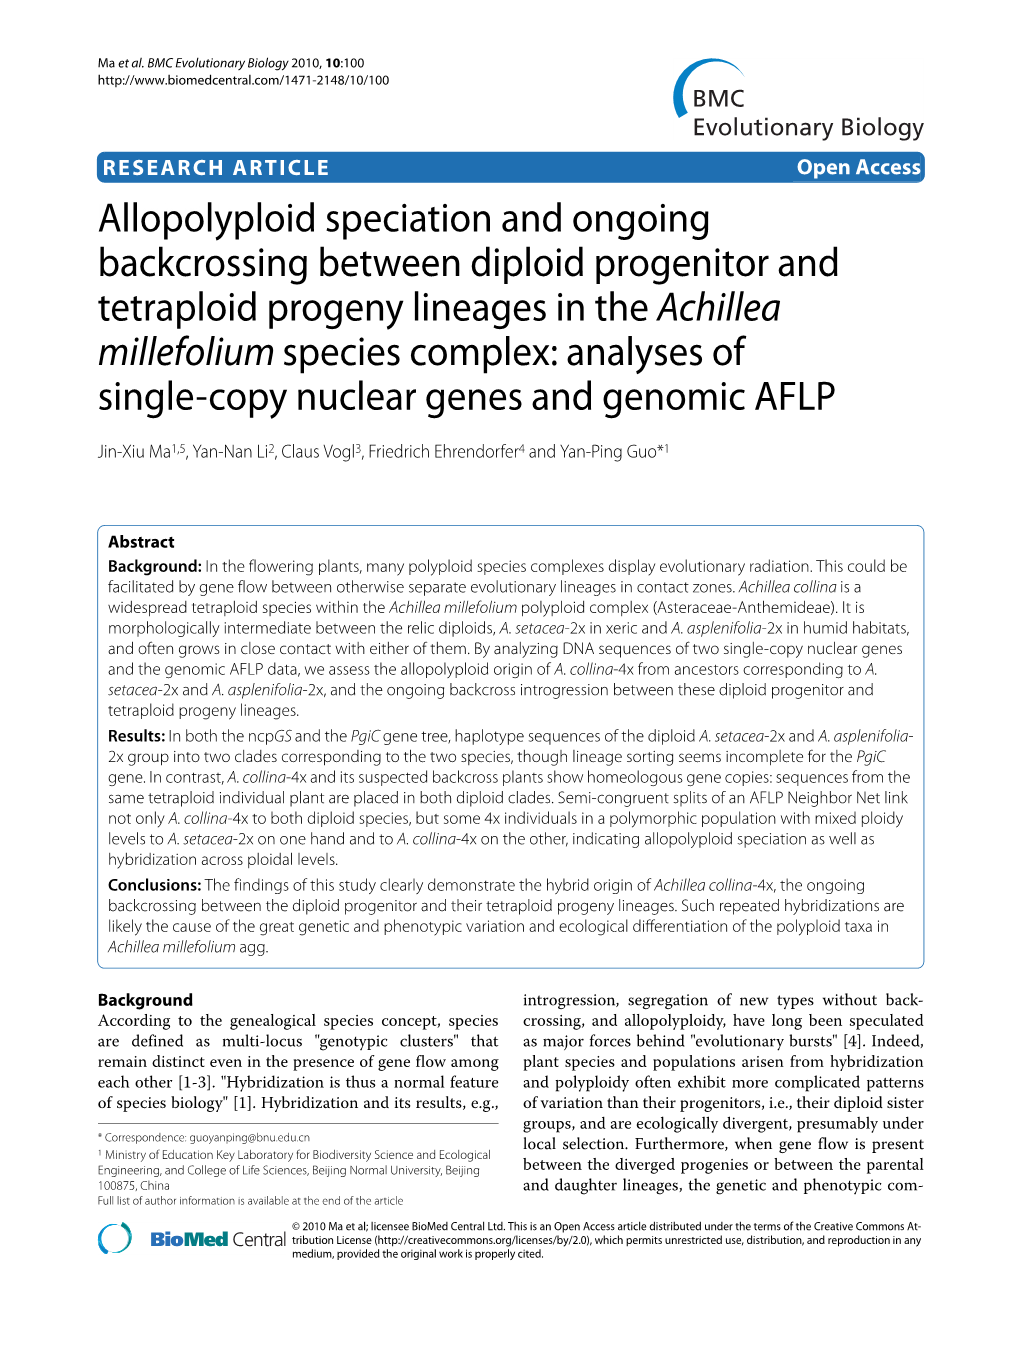 Allopolyploid Speciation and Ongoing Backcrossing Between Diploid Progenitor and Tetraploid Progeny Lineages in the Achillea